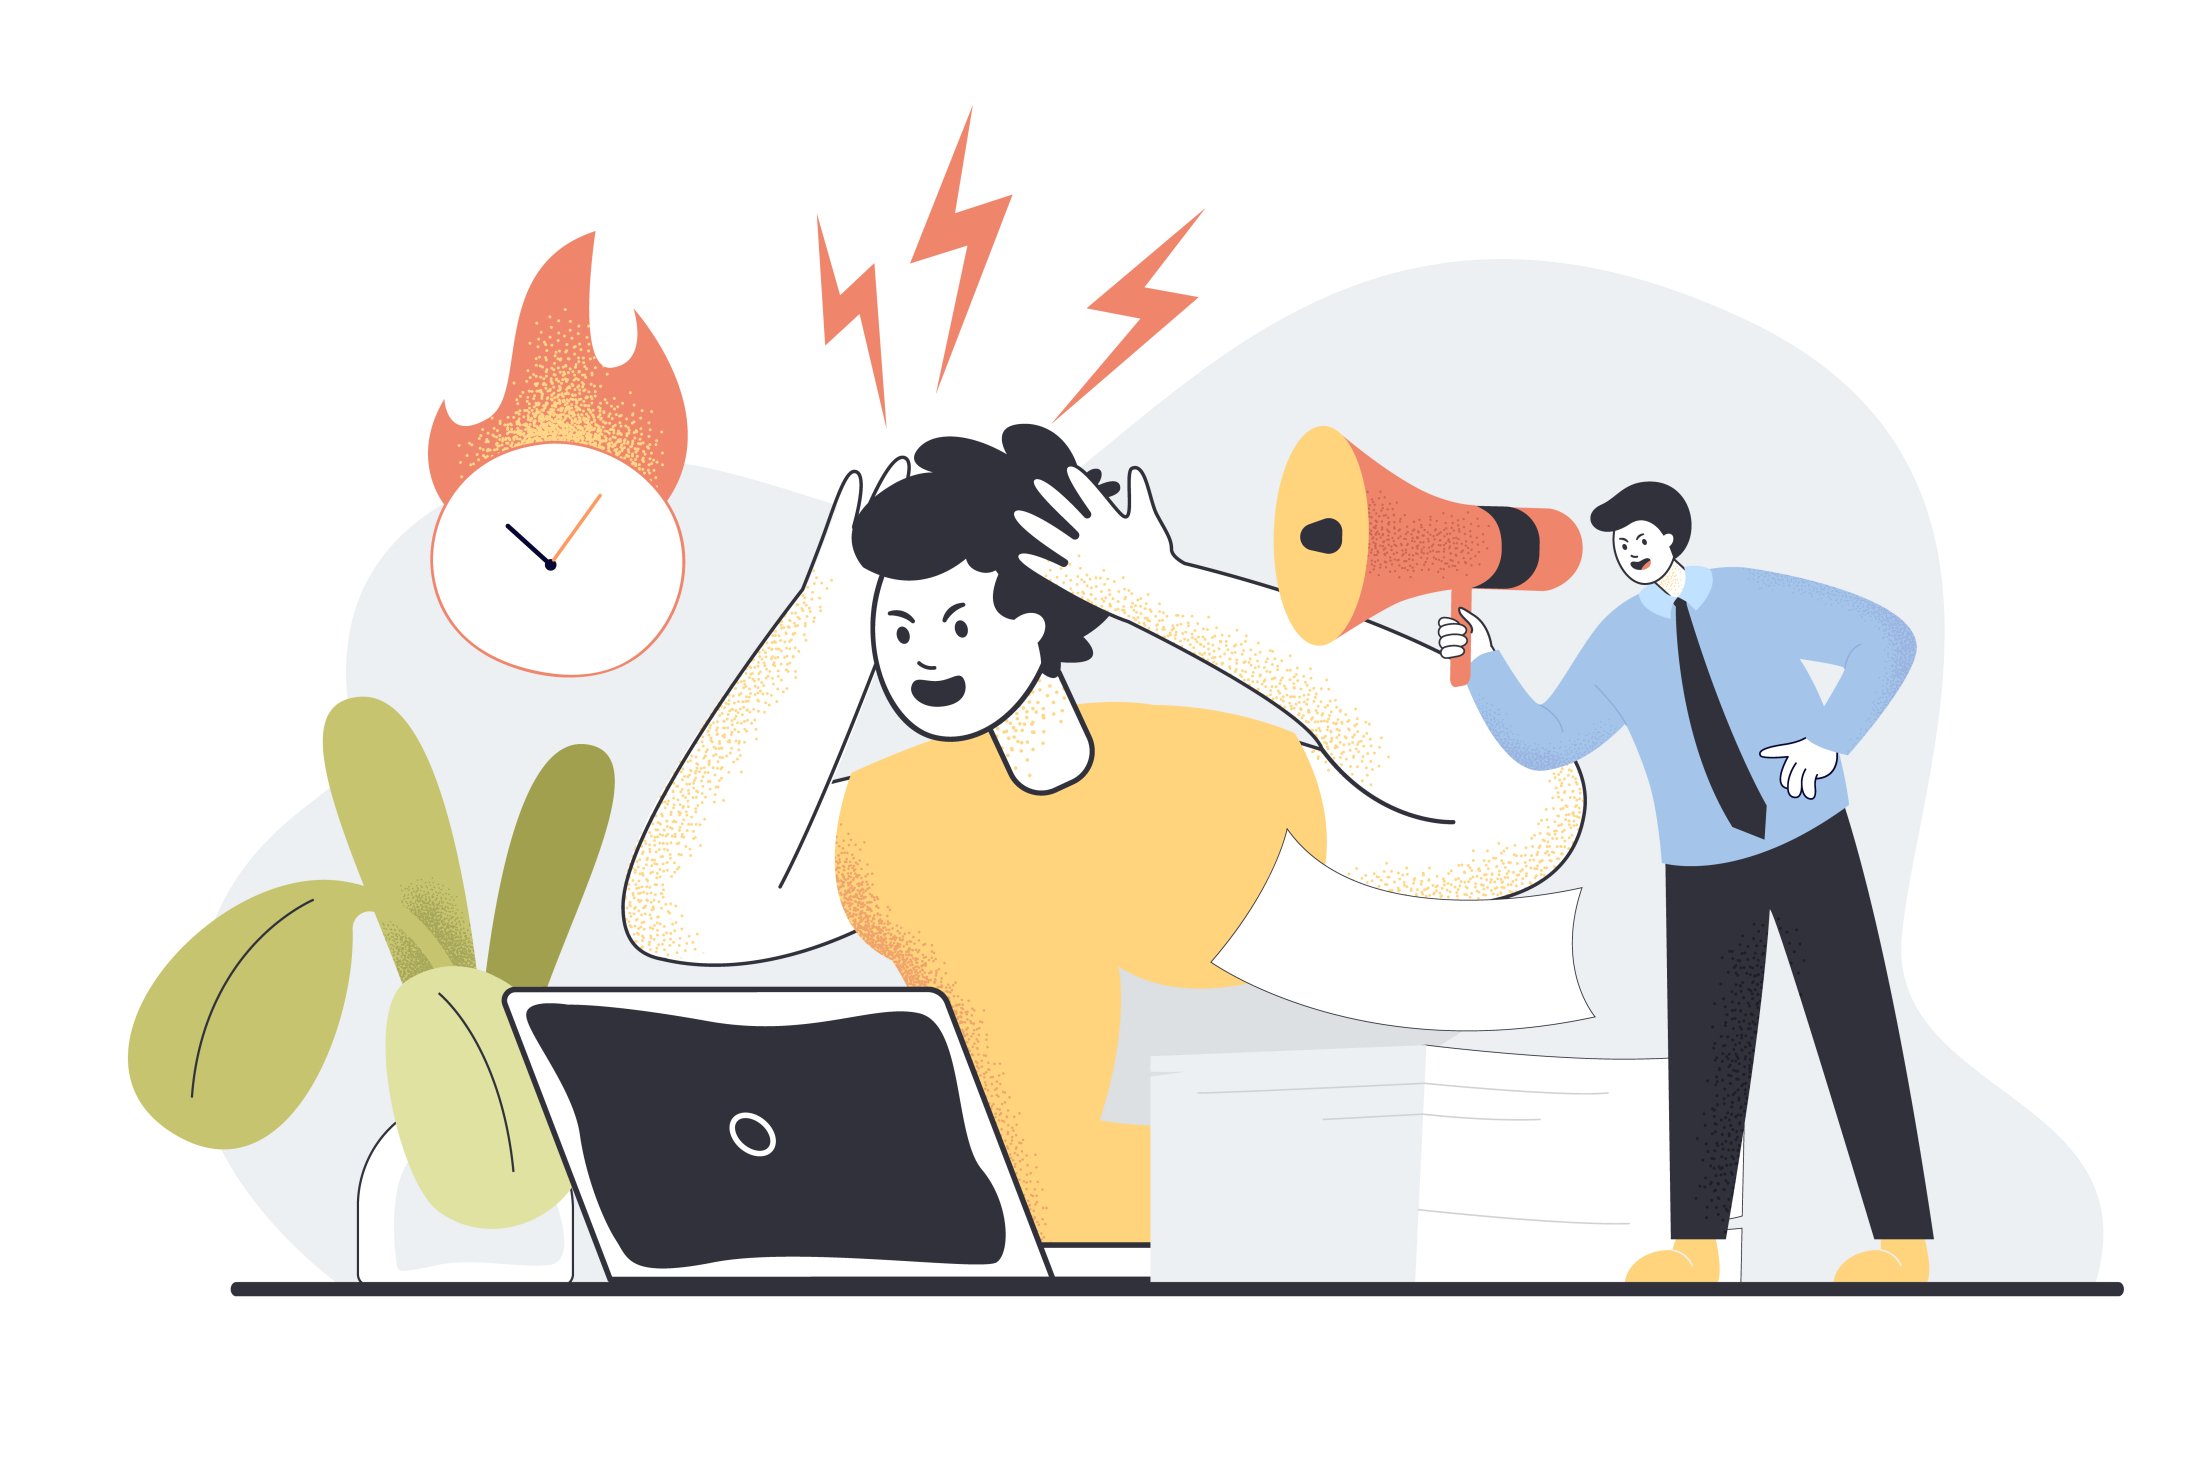 Boss shouting at exhausted employee flat vector illustration.jpg